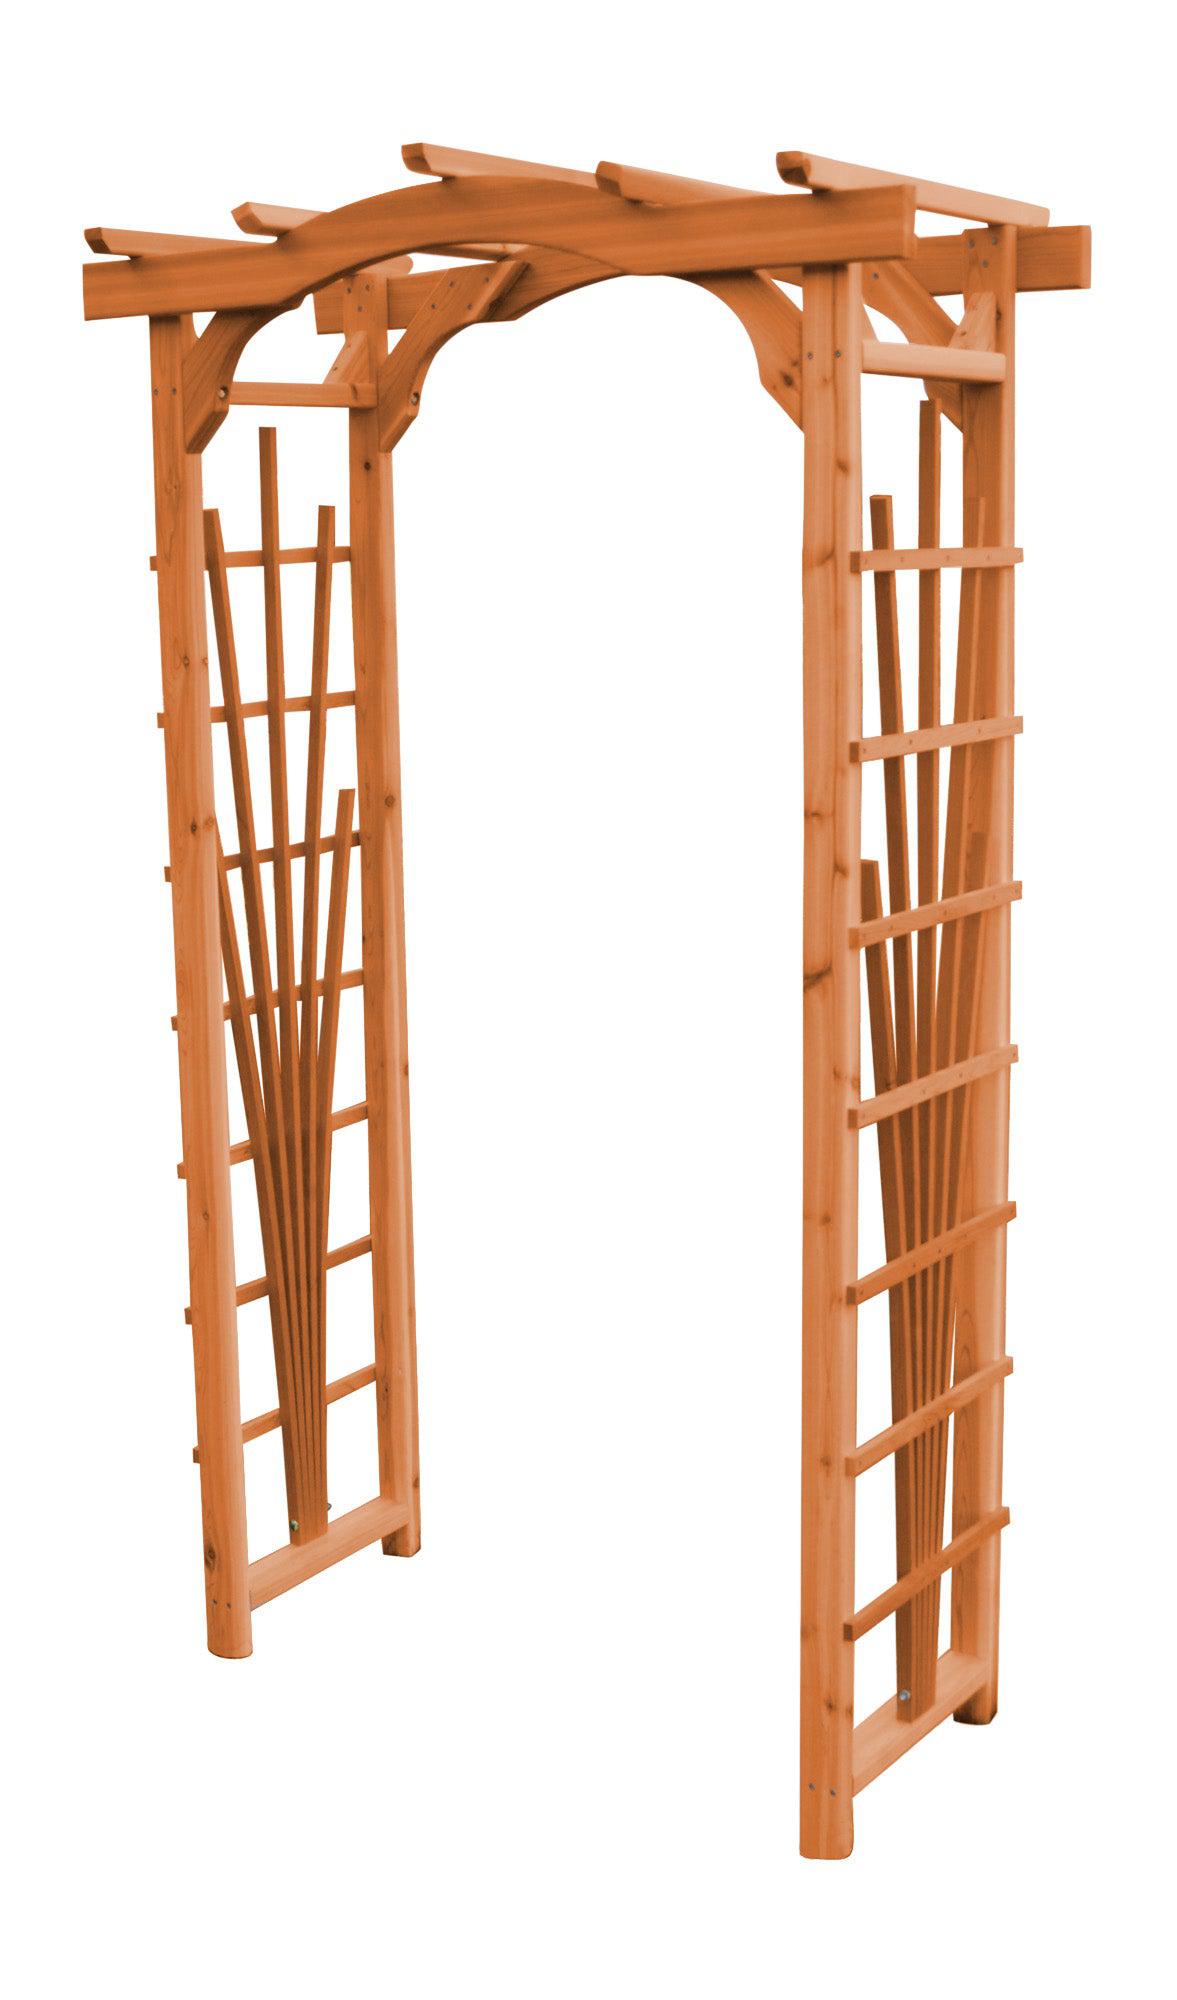 A&L Furniture Co. Western Red Cedar 3' Cranbrook Arbor - LEAD TIME TO SHIP 4 WEEKS OR LESS